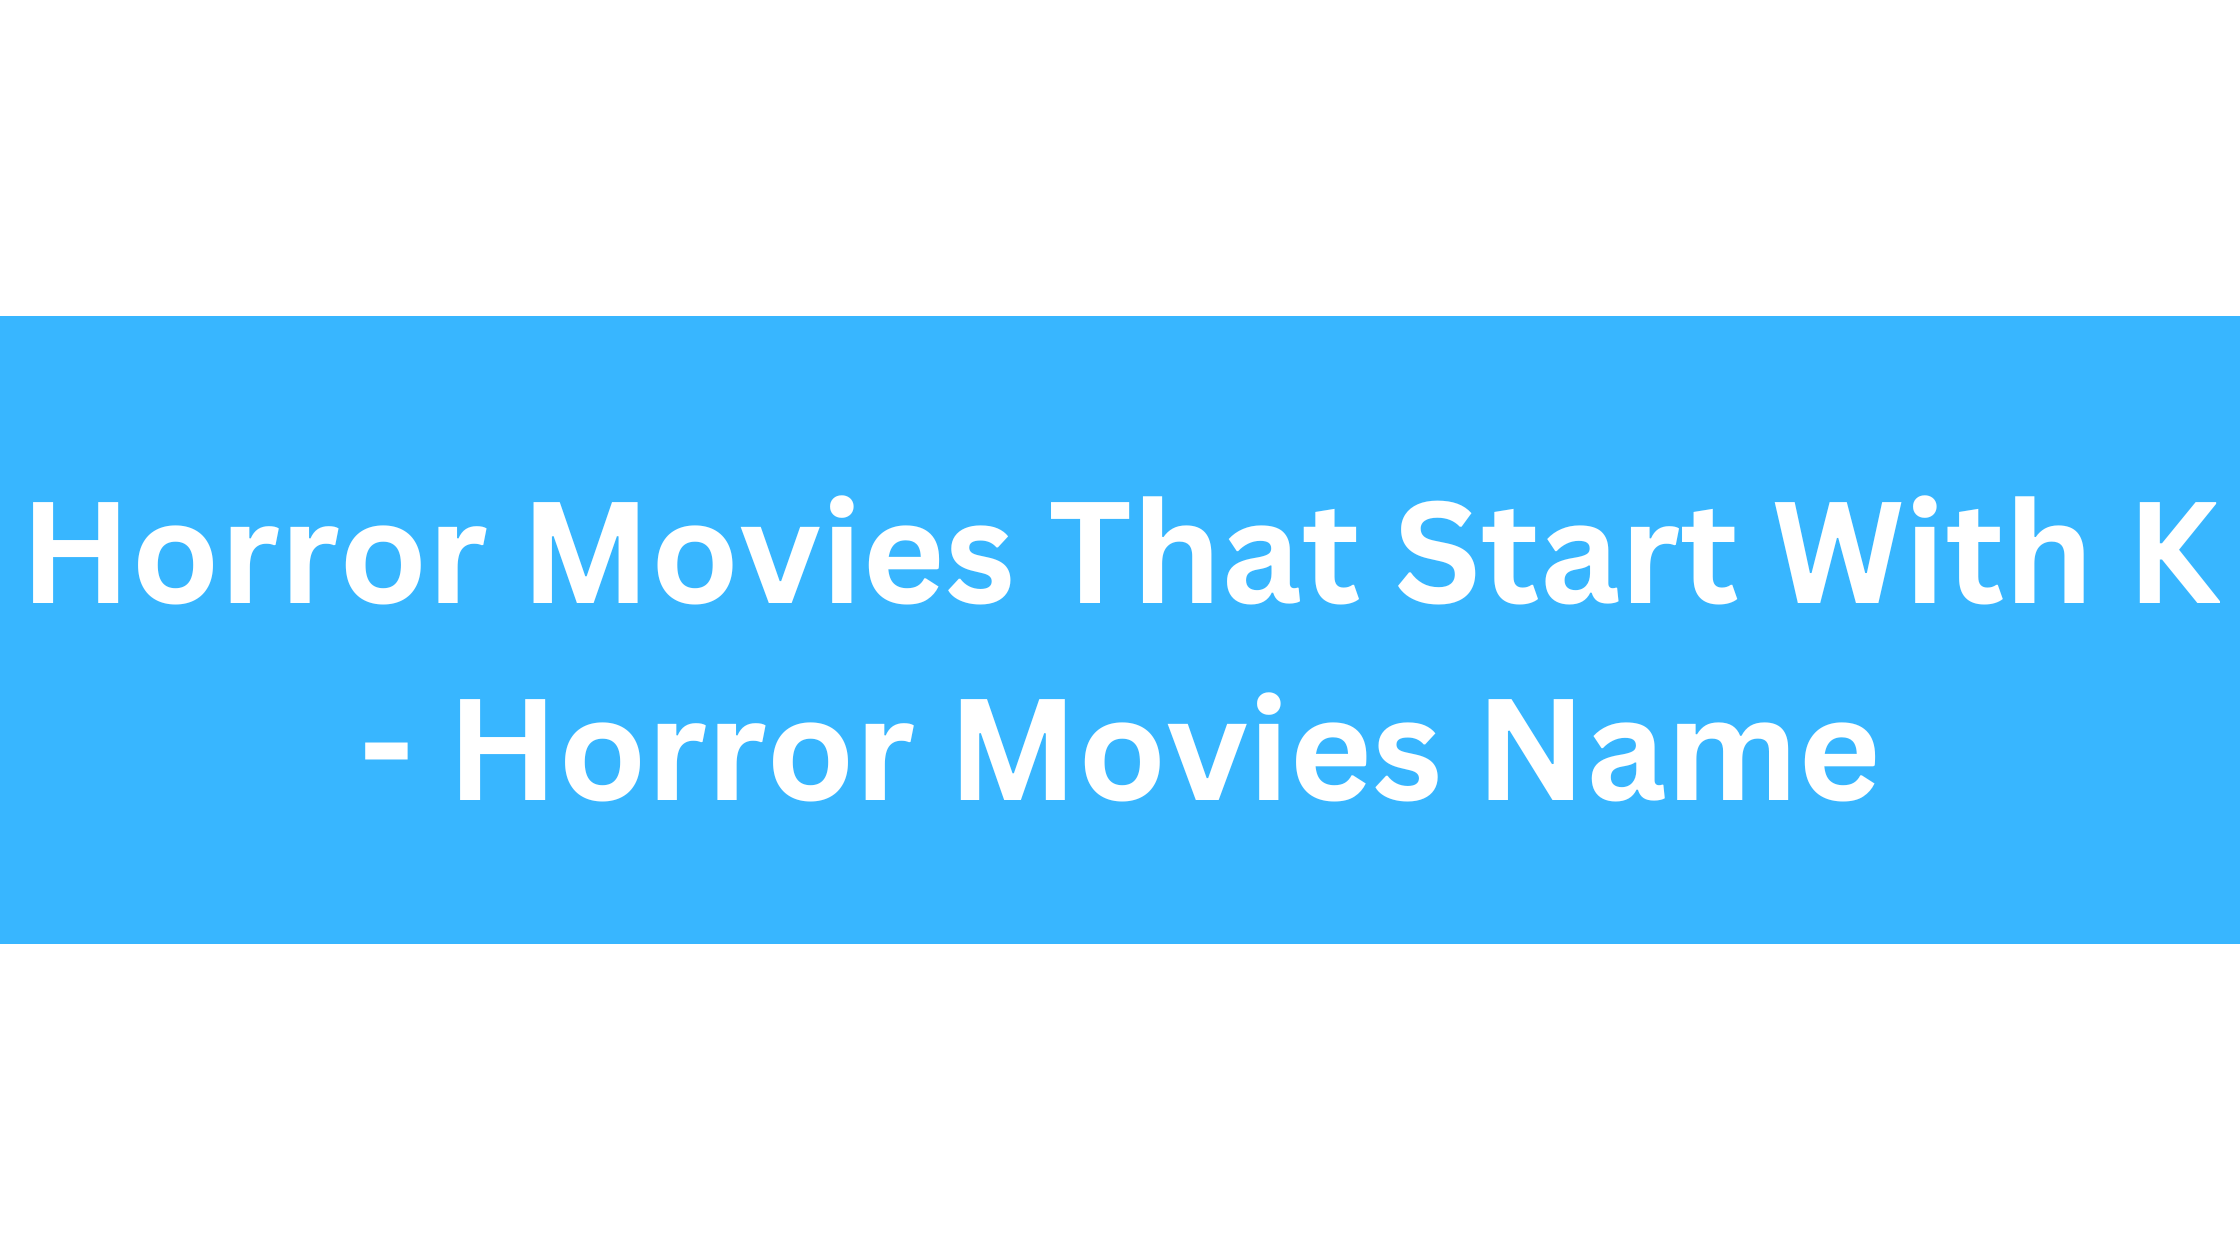 Horror Movies That Start With K